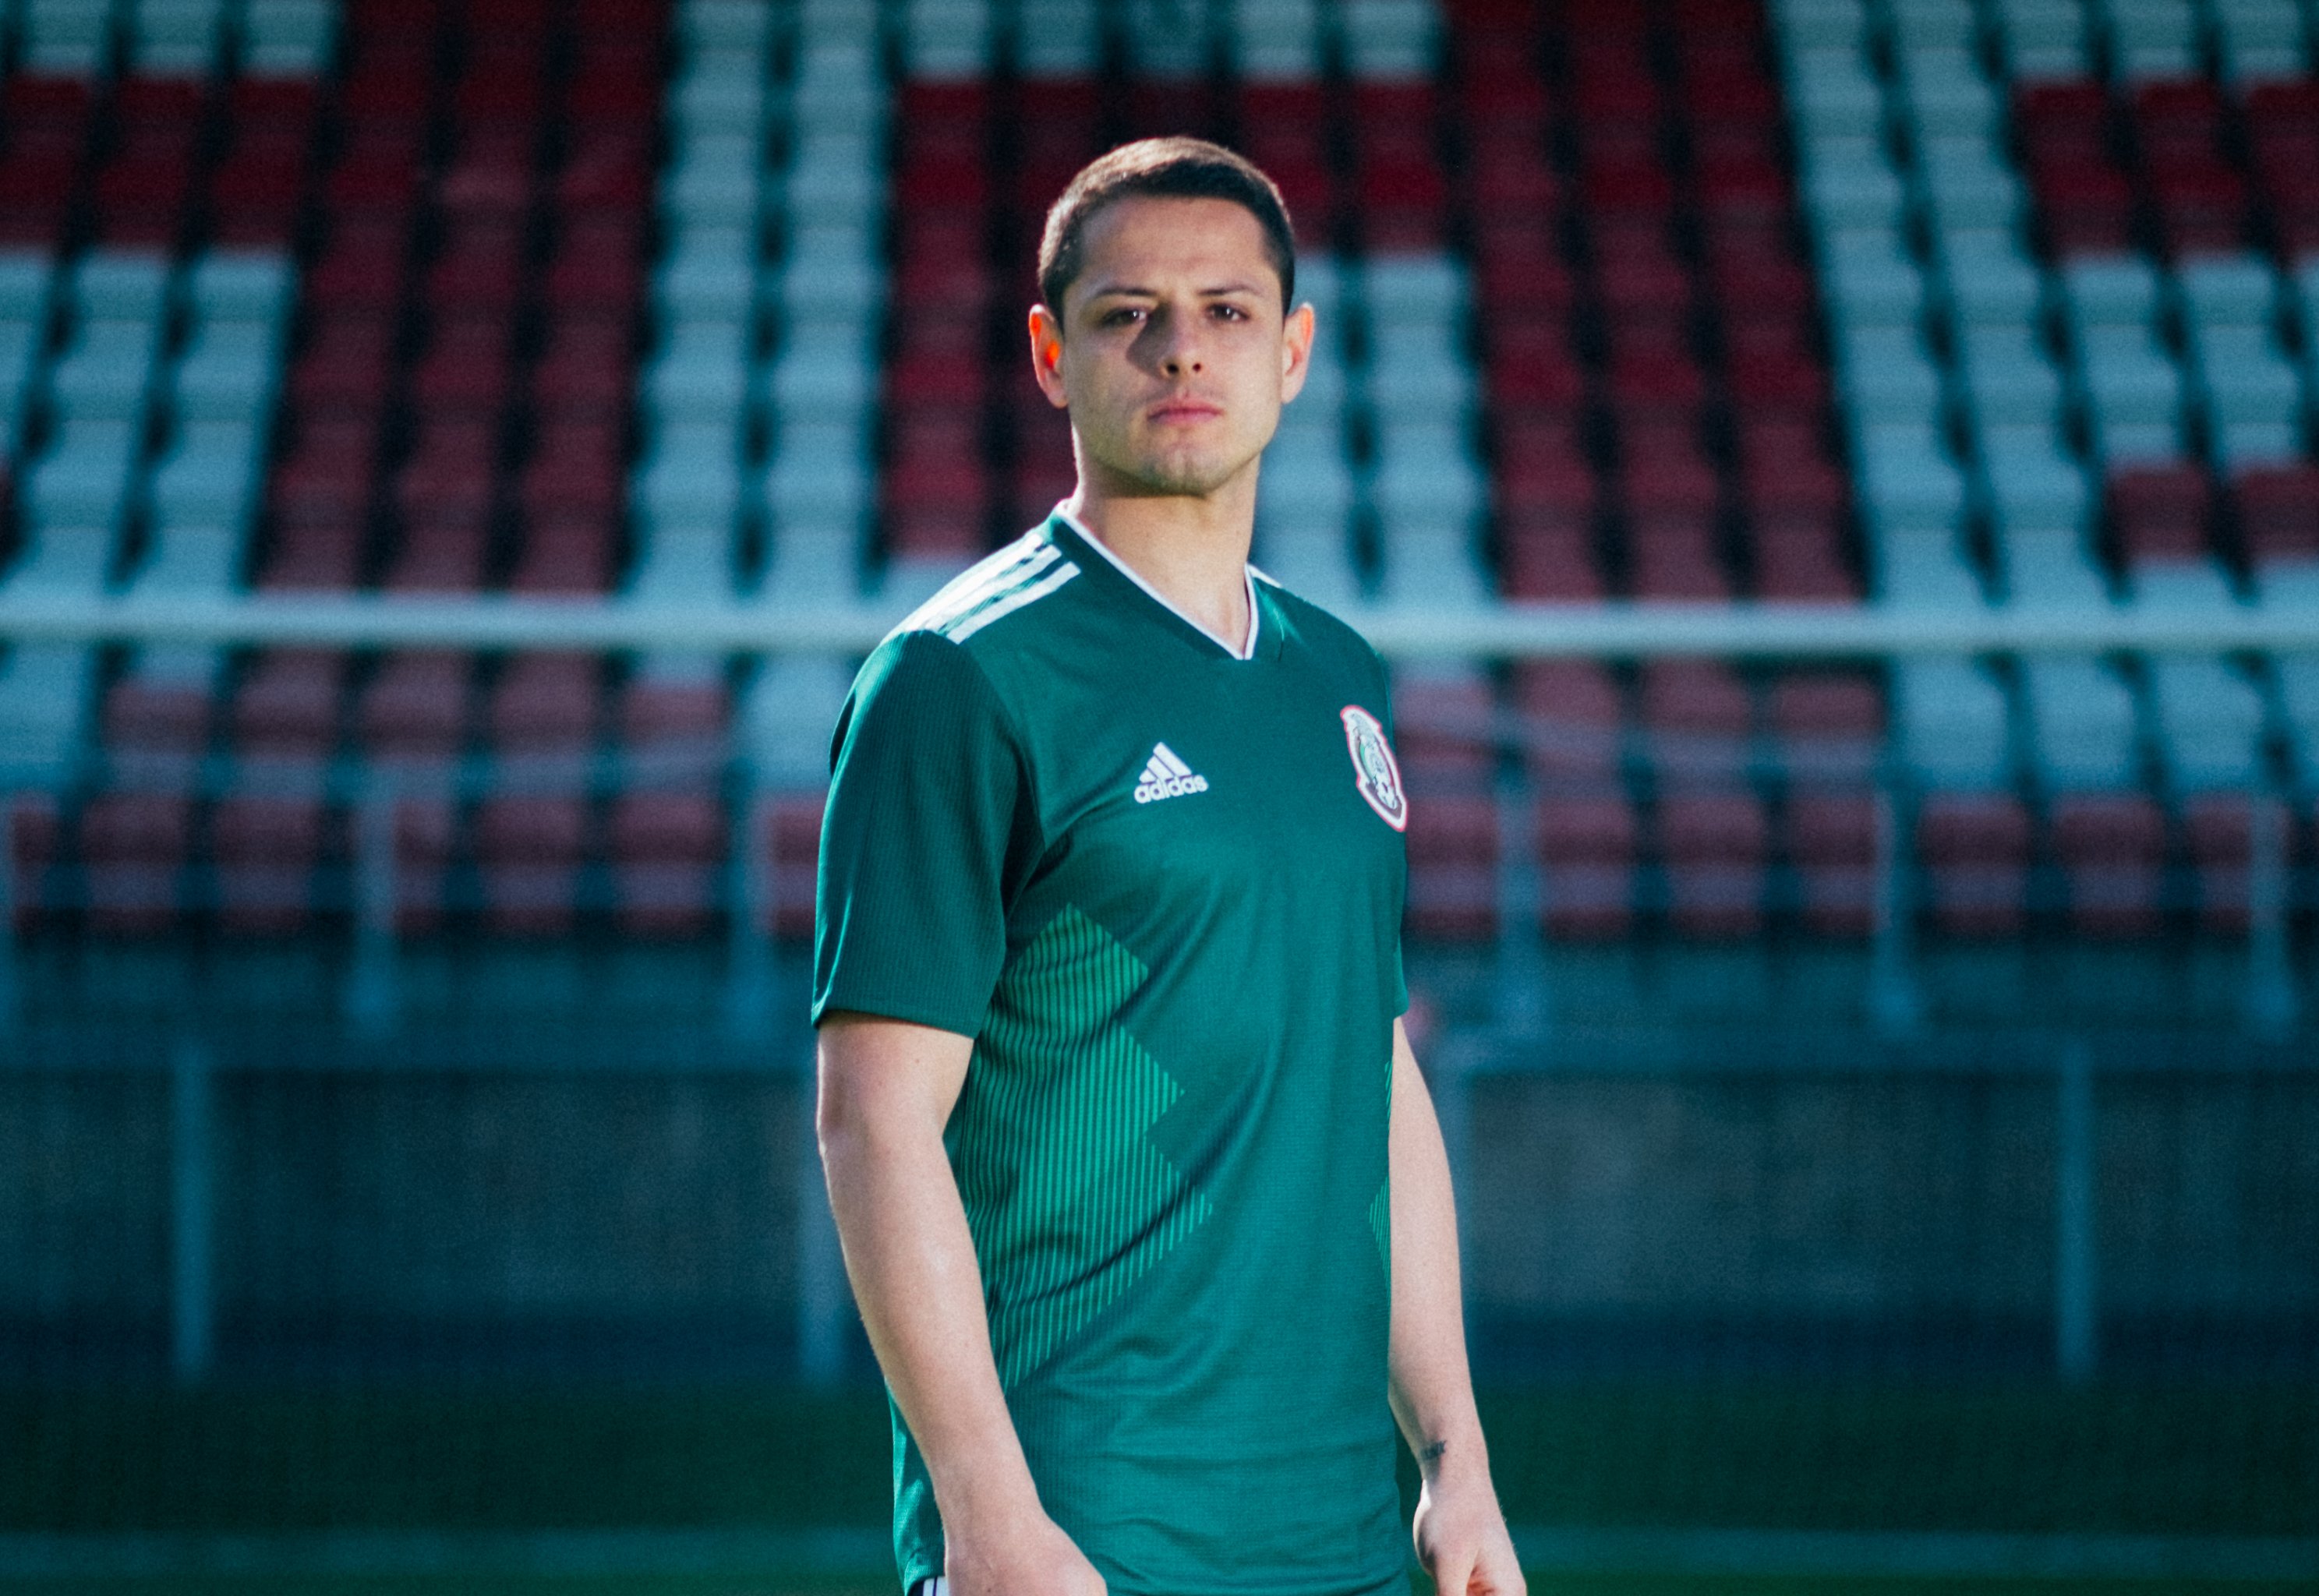 OnTheField Chicharito Mexico National Team Fan Jersey